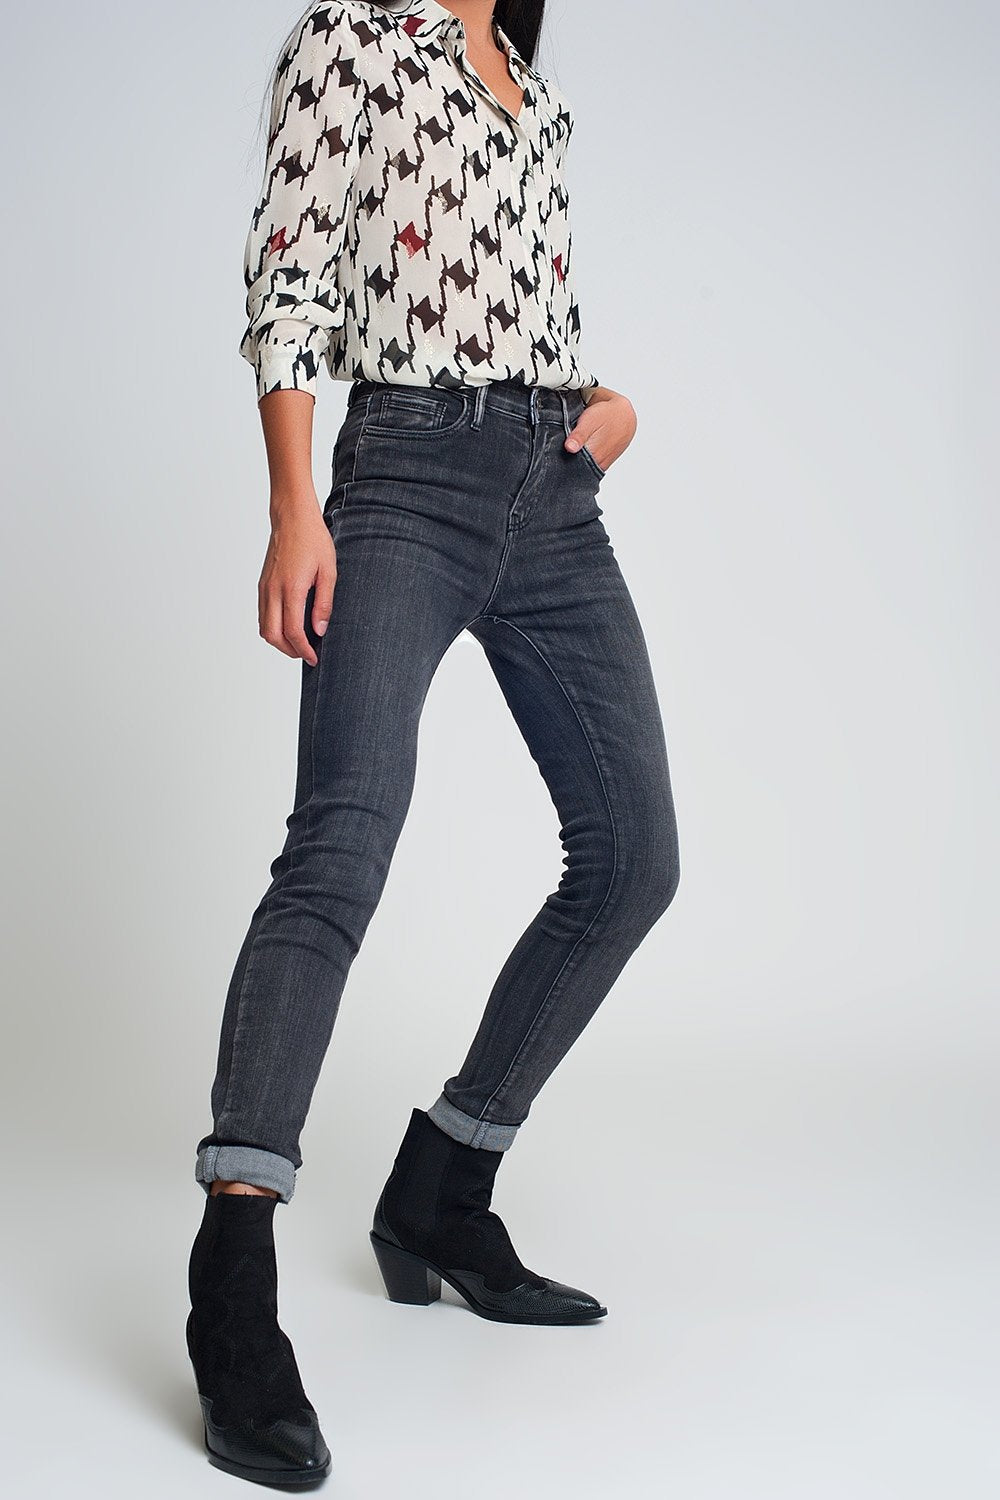 High Rise Skinny Jeans in Washed Black - LOLA LUXE